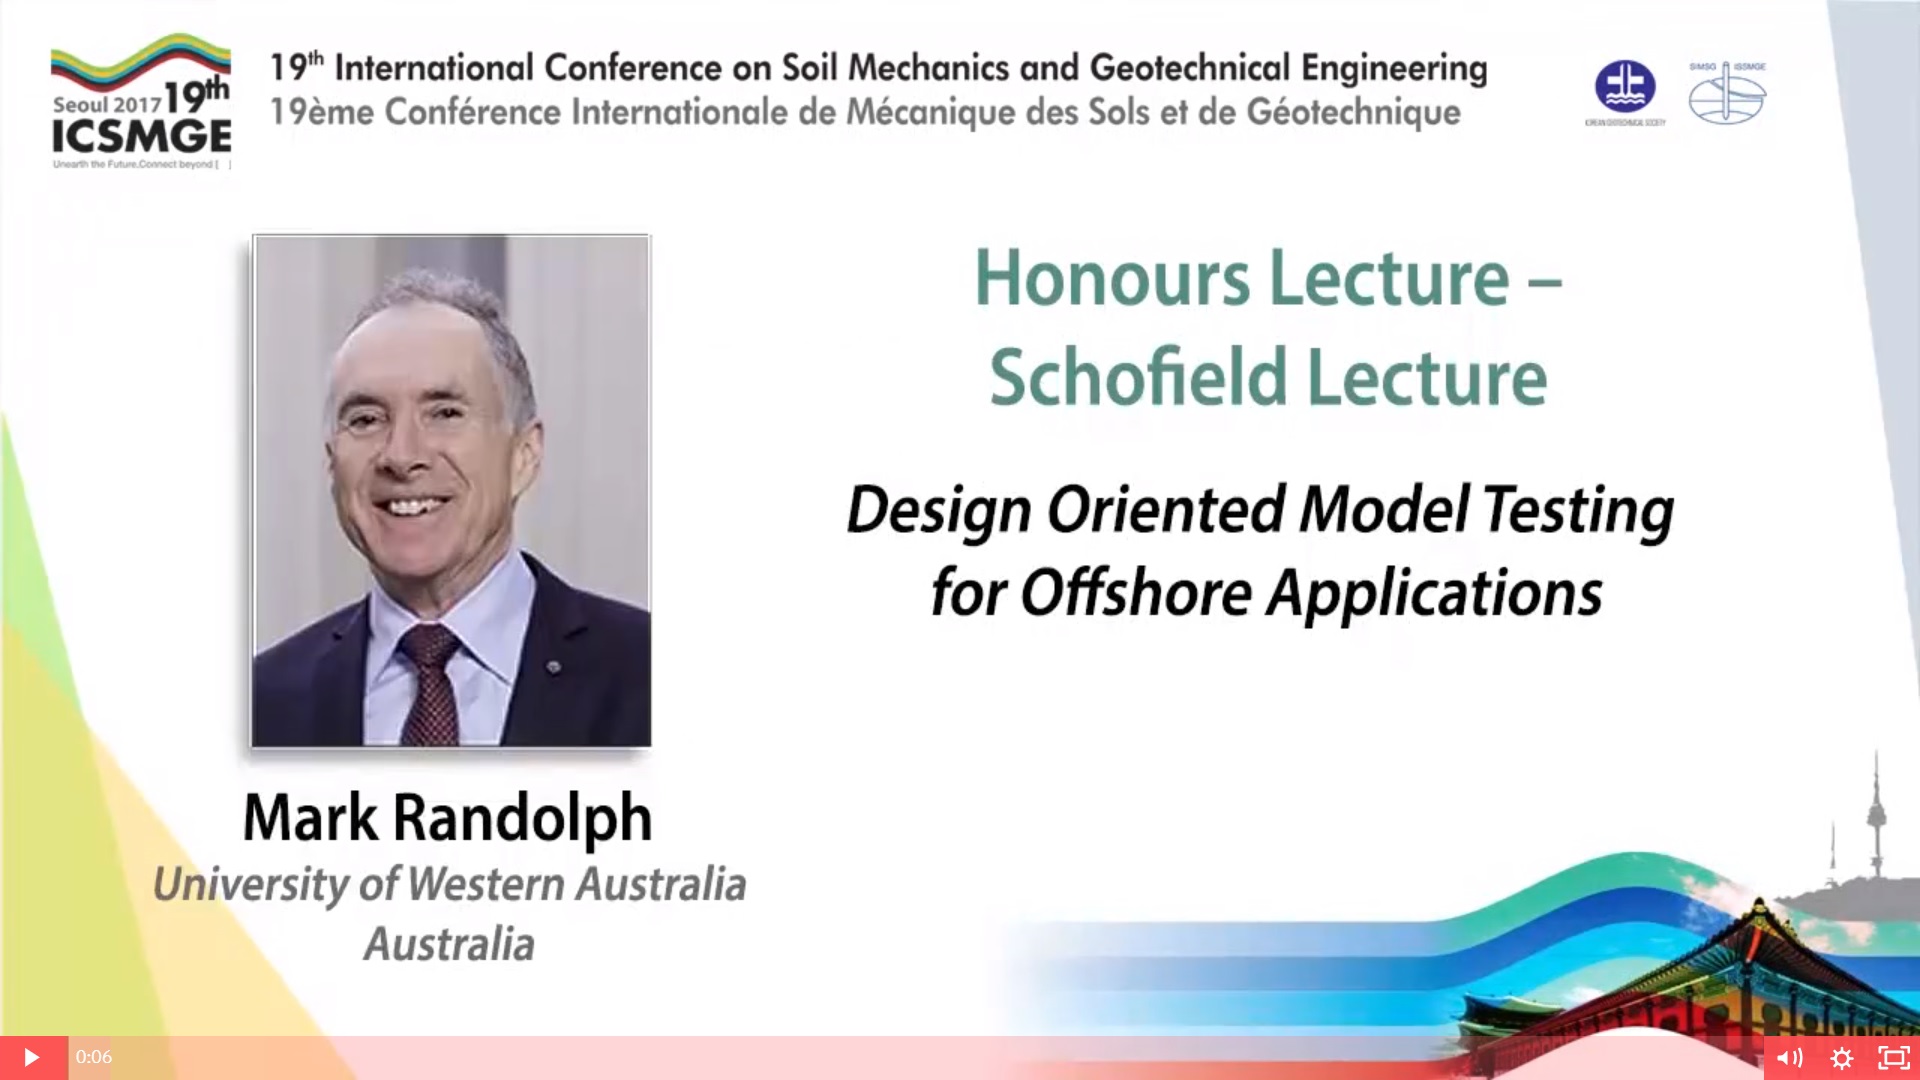 Design Oriented Model Testing for Offshore Applications (Schofield Lecture - 19th ICSMGE) {"category":"honour_lecture","subjects":["Offshore Geotechnics"],"number":"ICSMGE19105","instructors":["Mark Randolph"]}